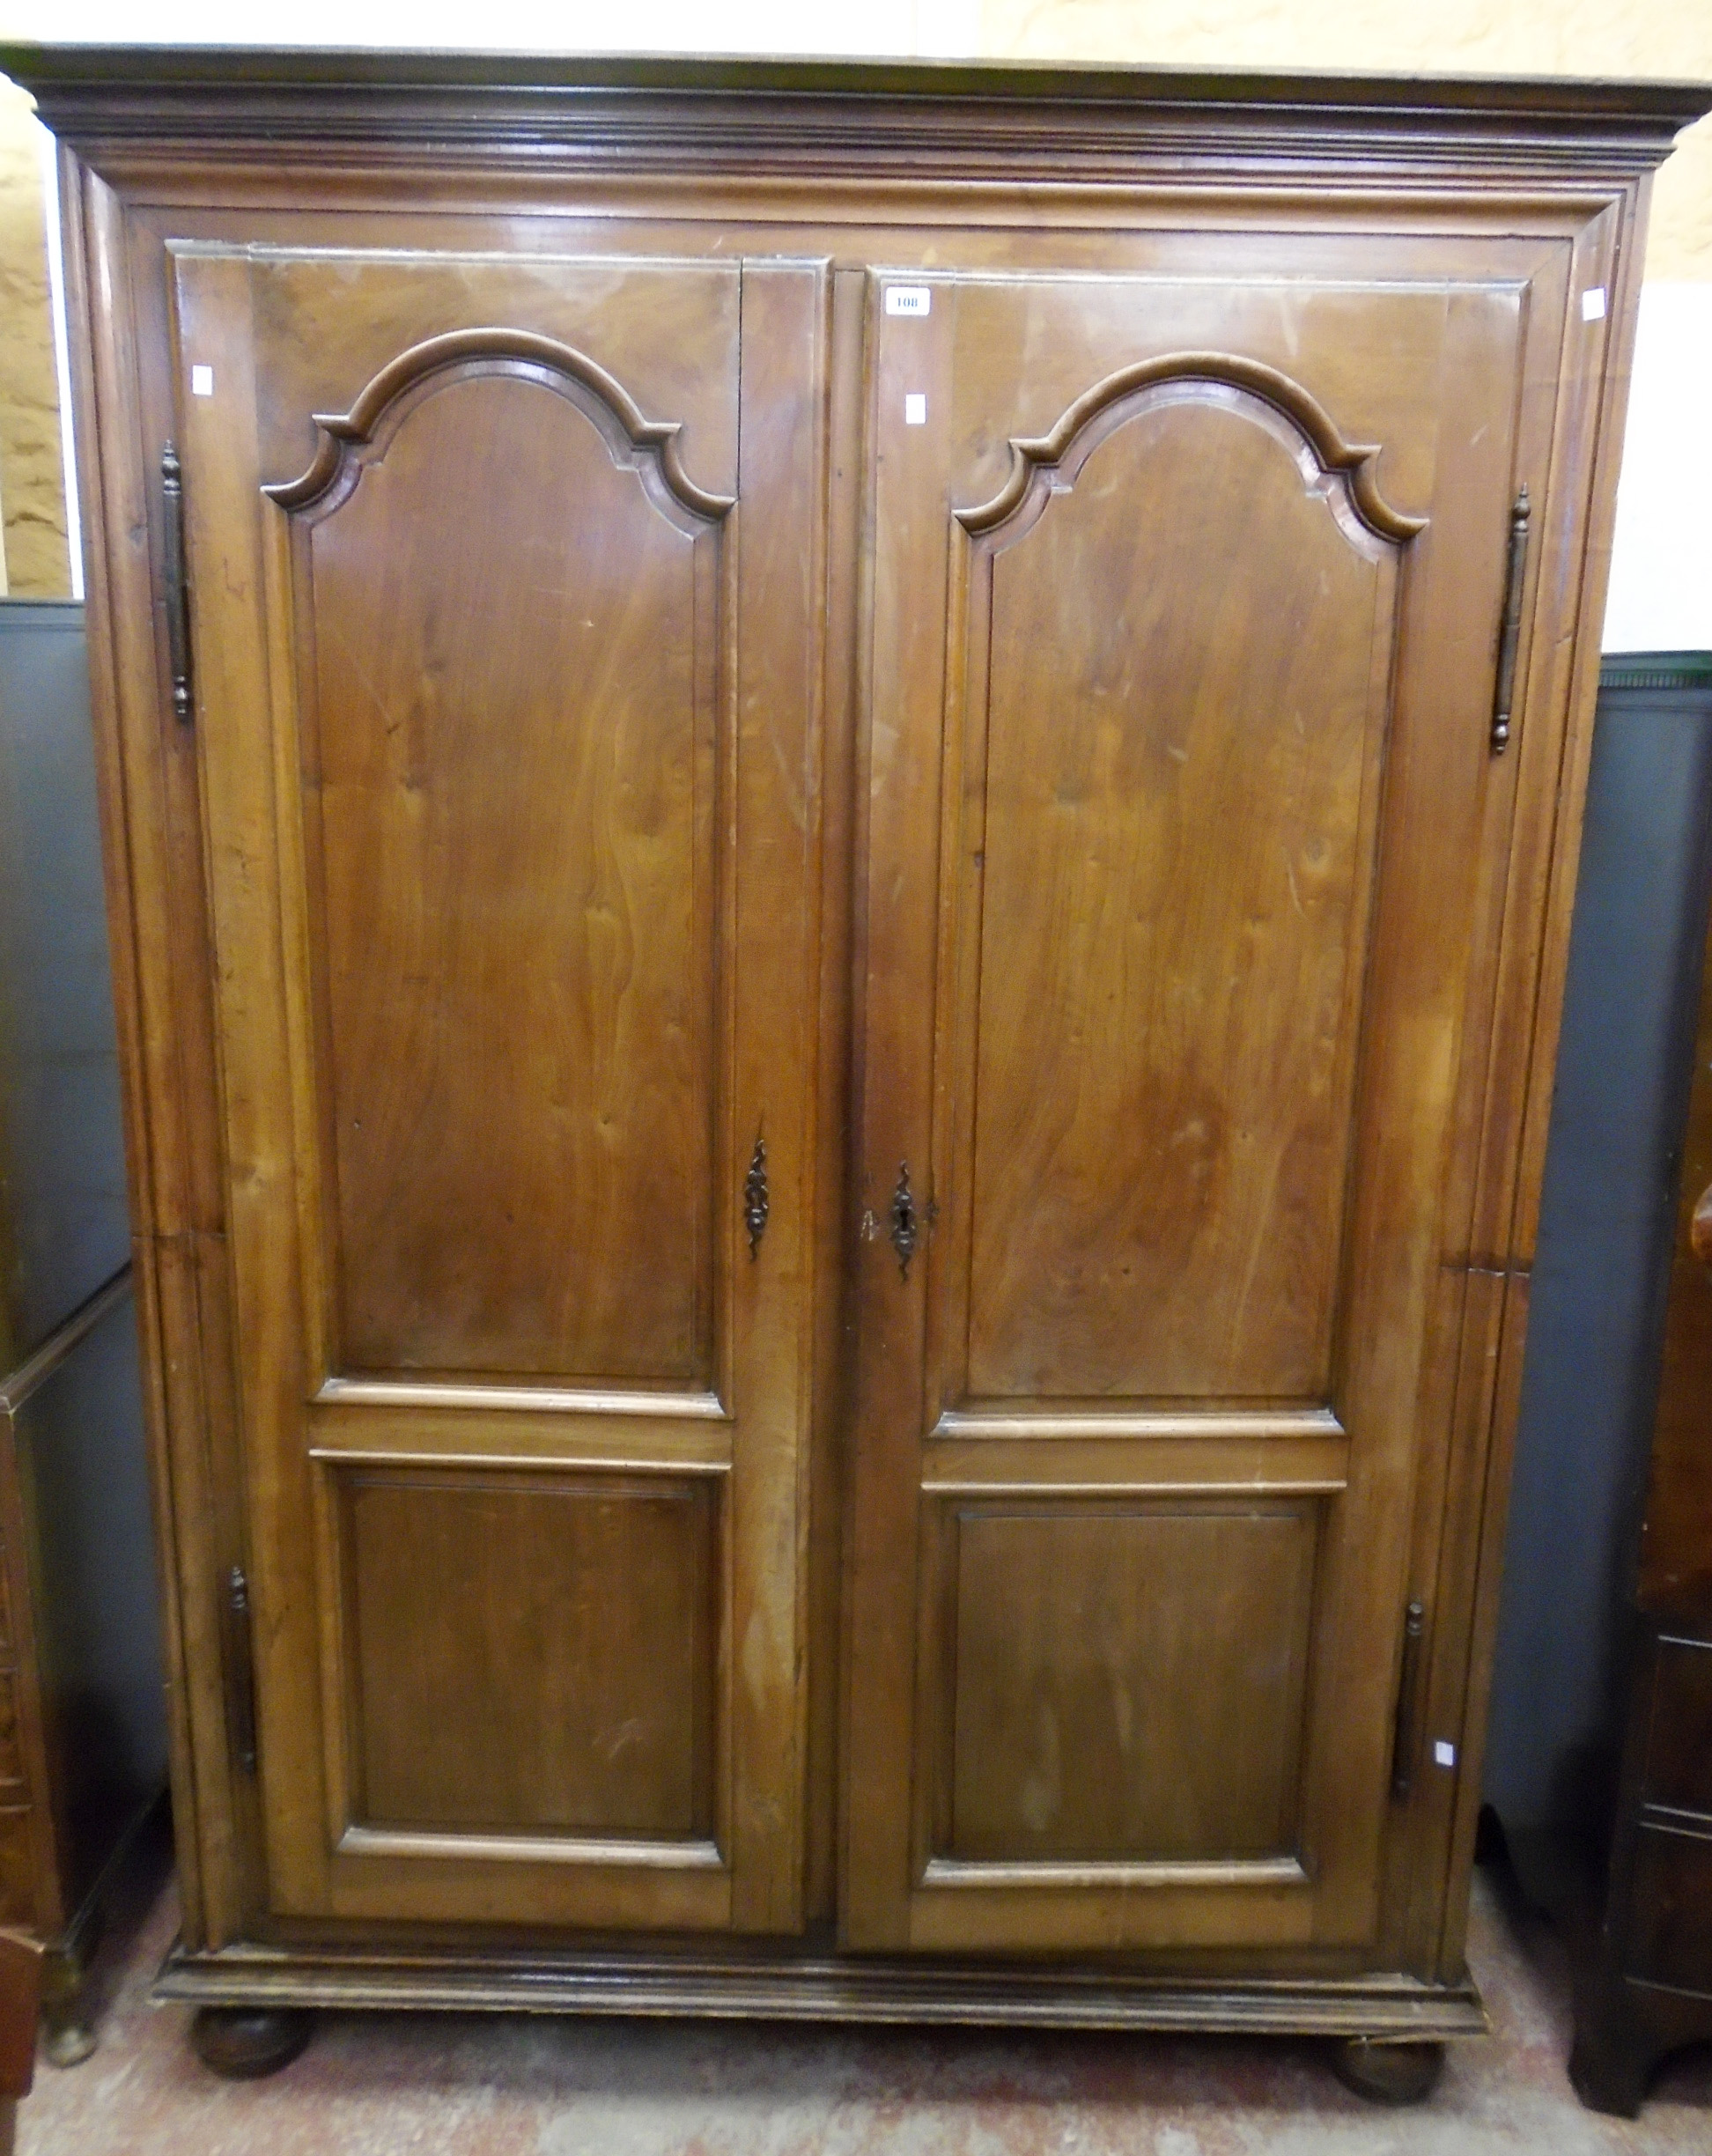 A 5' 19th Century French walnut armoire with moulded cornice and part fitted interior enclosed by